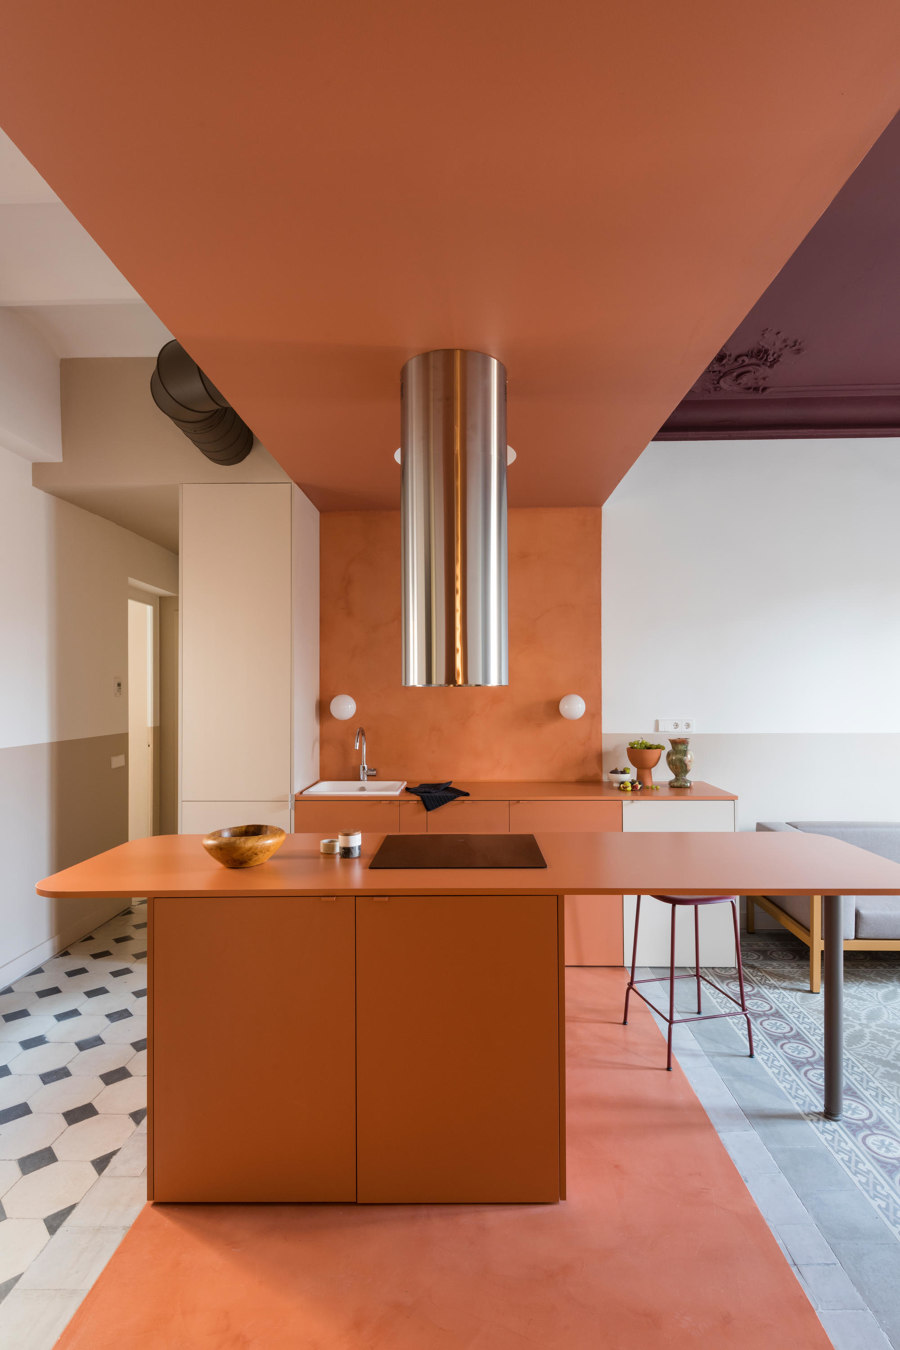 Cooking by numbers: chromatic kitchen projects | Nouveautés